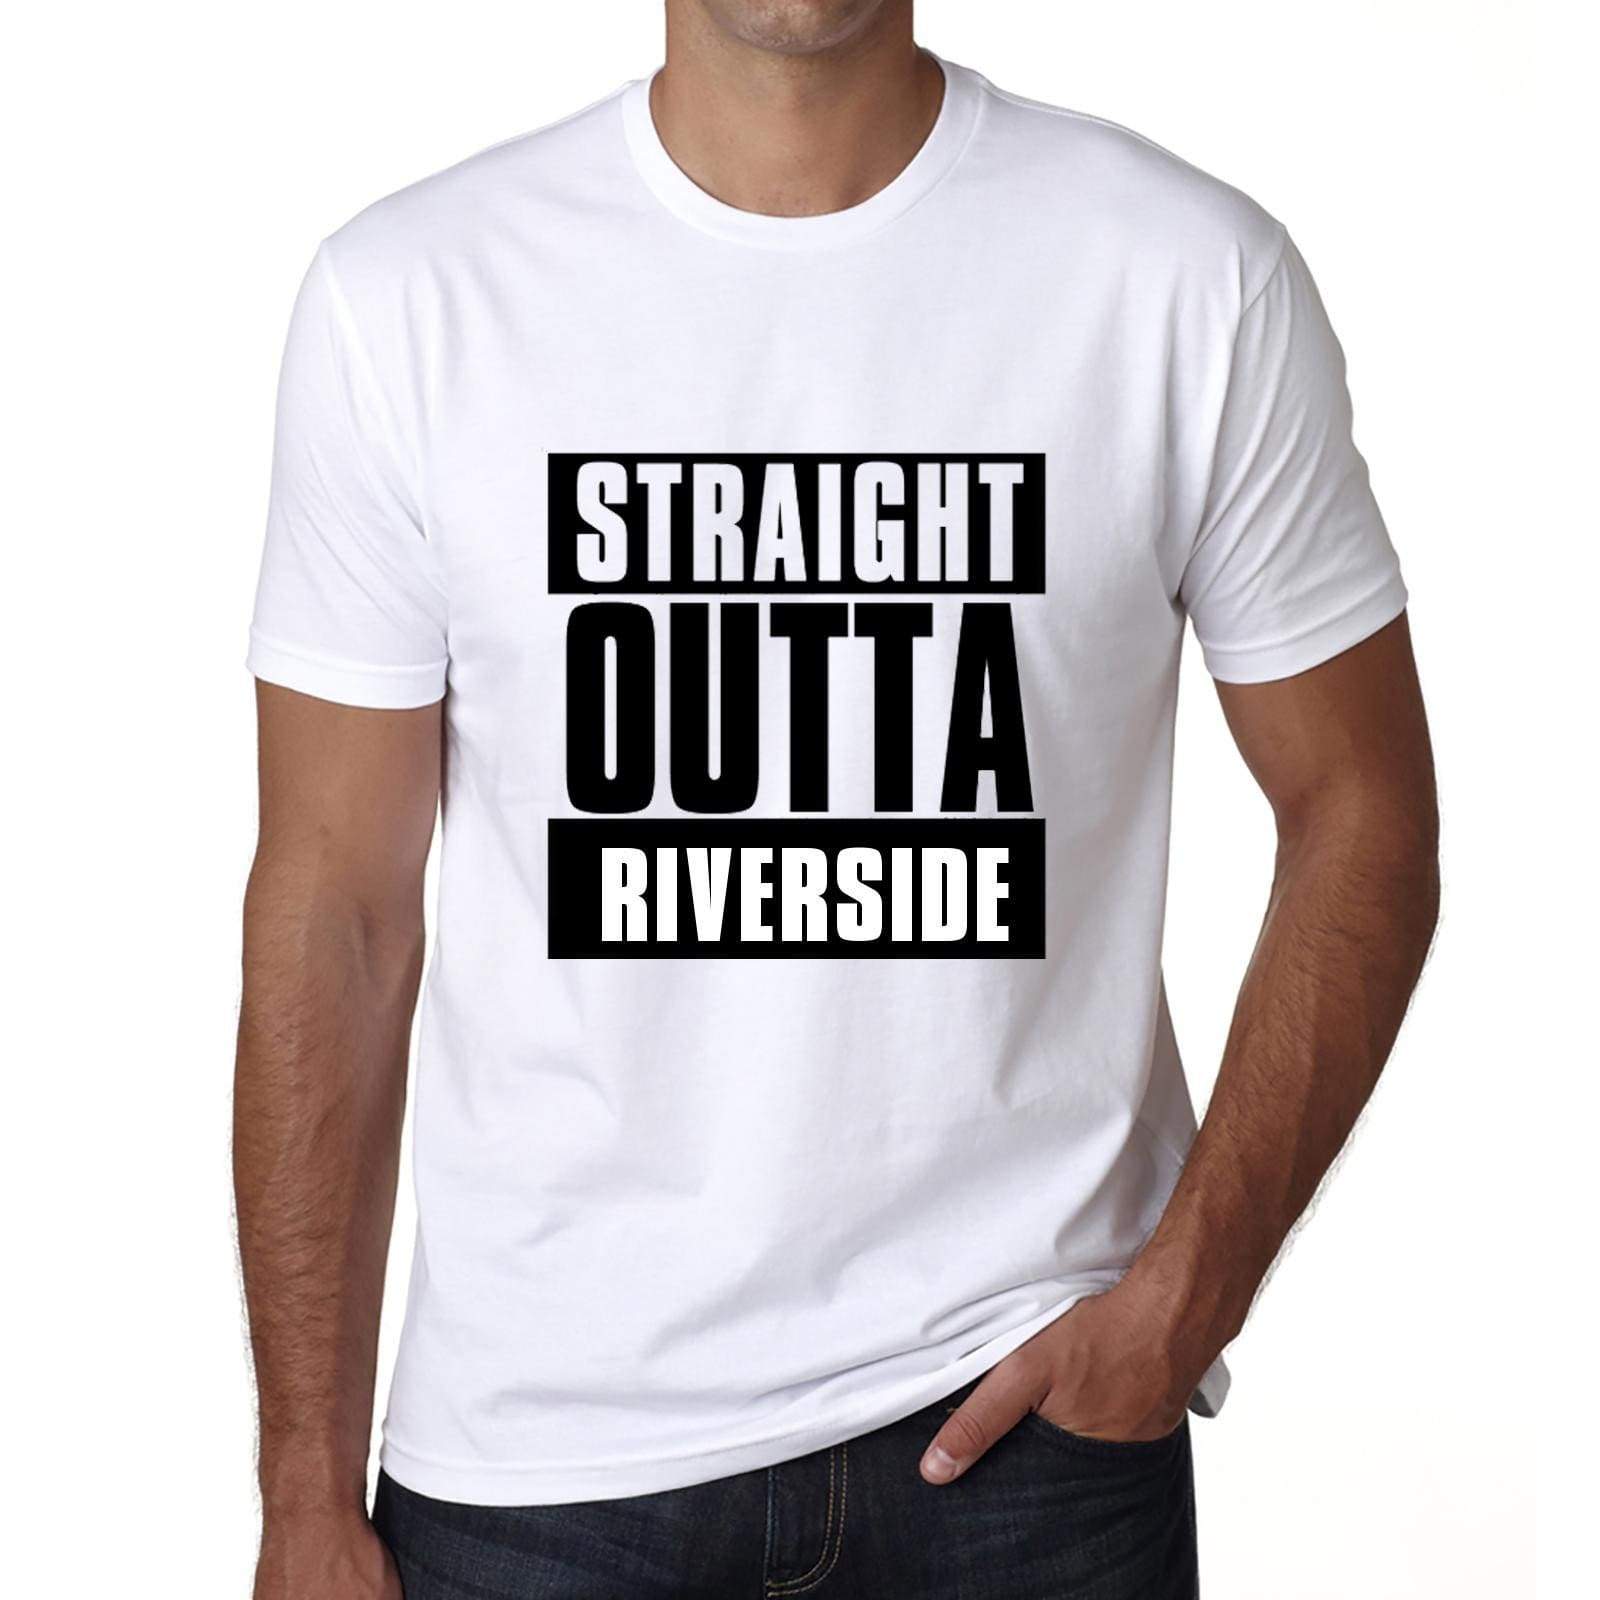 Straight Outta Riverside Mens Short Sleeve Round Neck T-Shirt 00027 - White / S - Casual